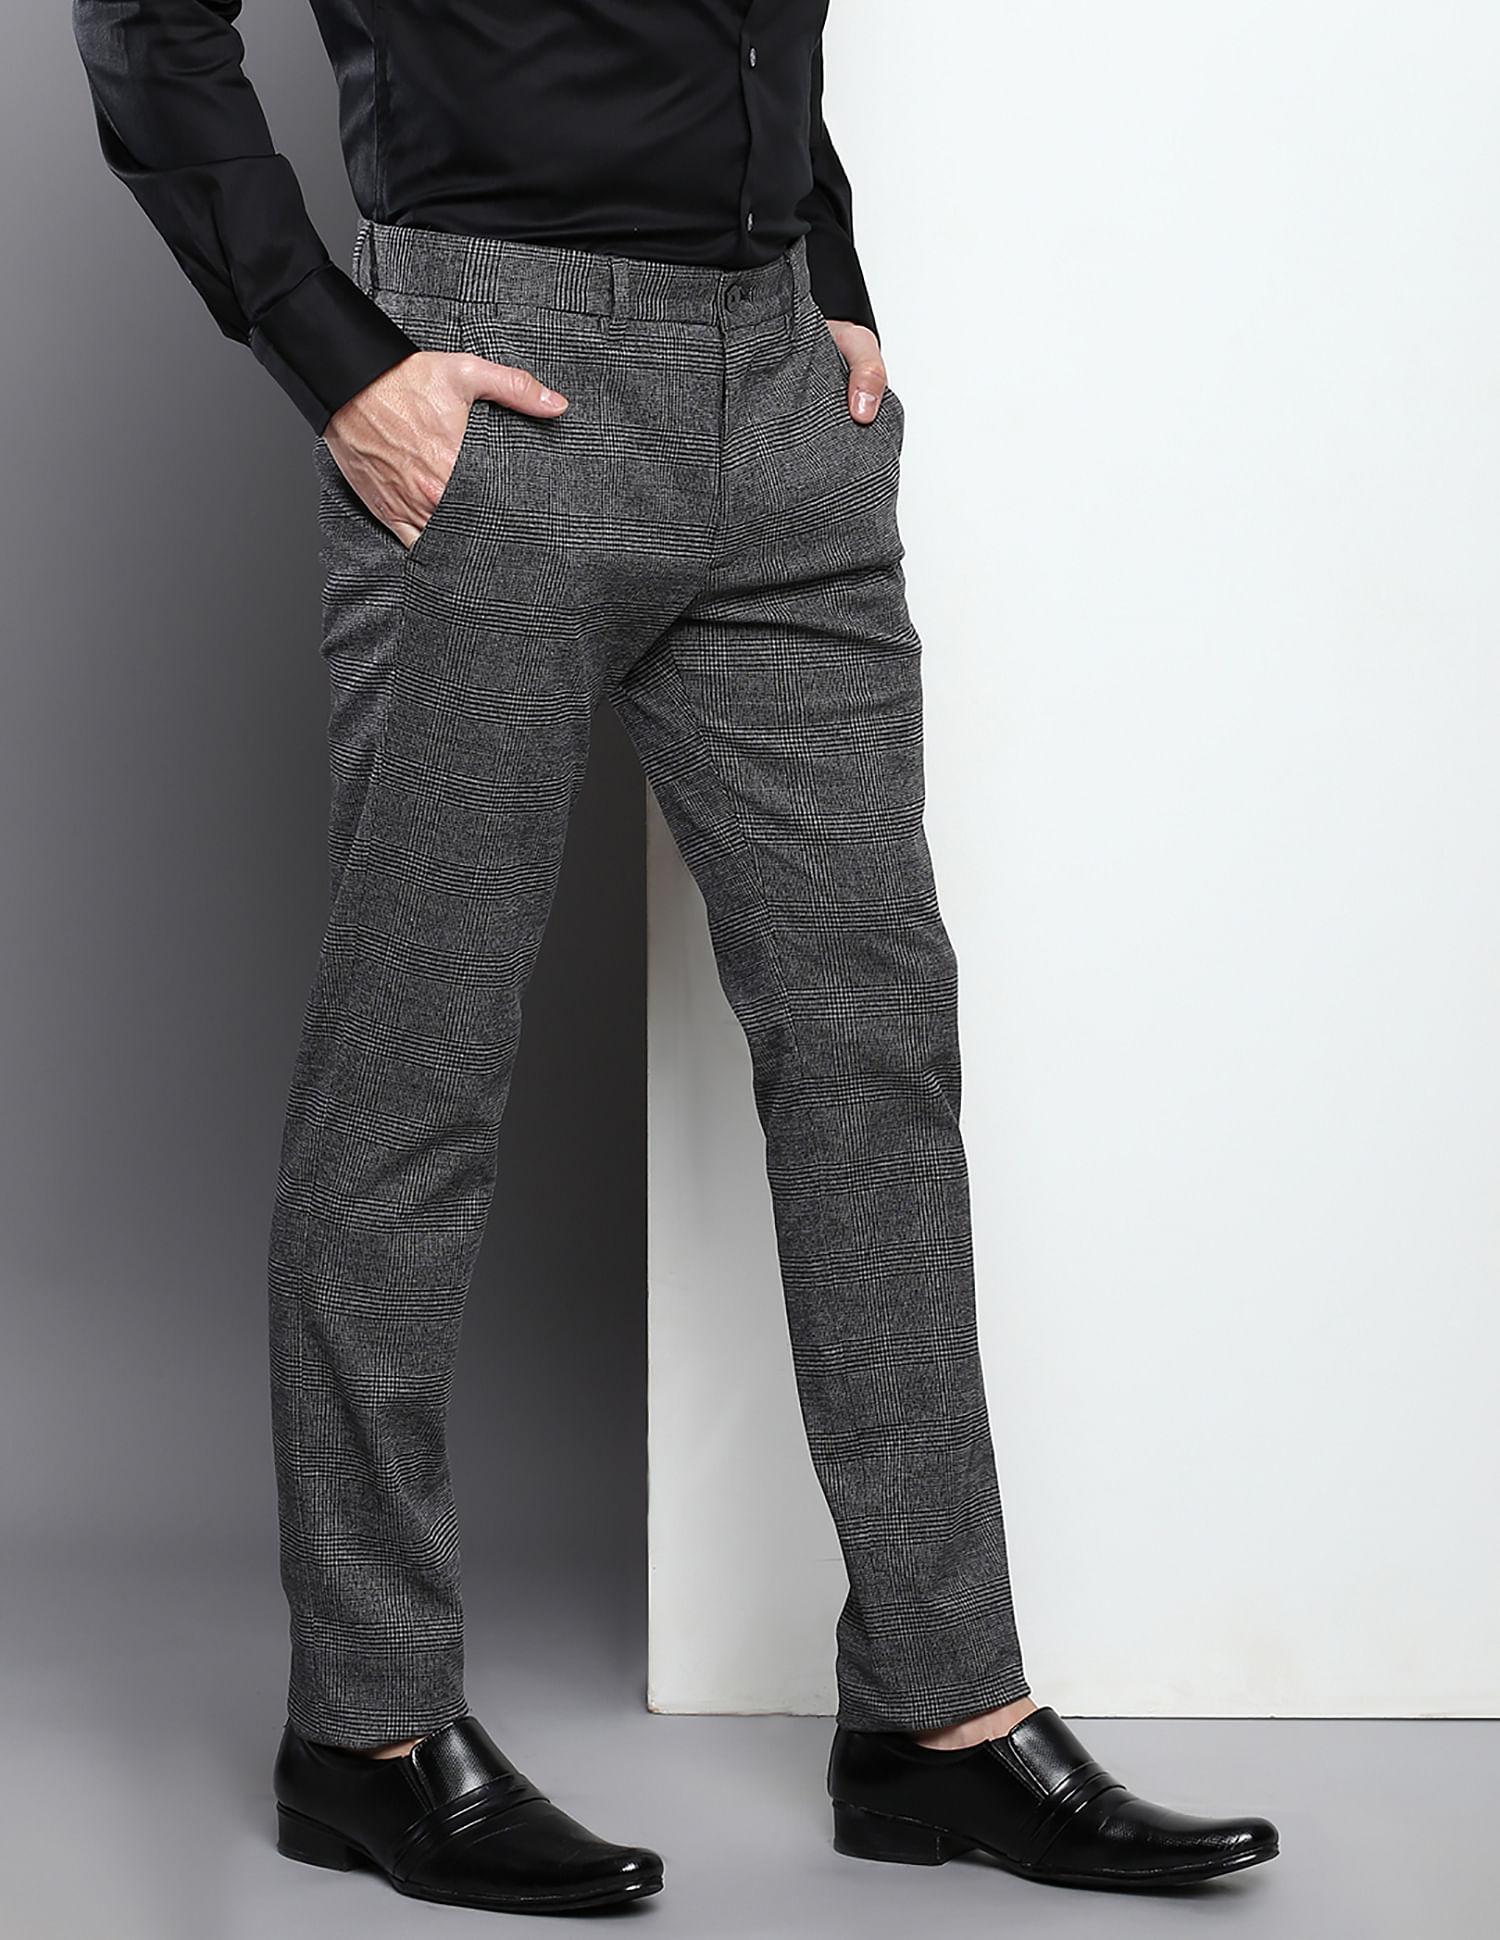 Limehaus | Stone Grey Navy Micro Checked Trousers | Suit Direct